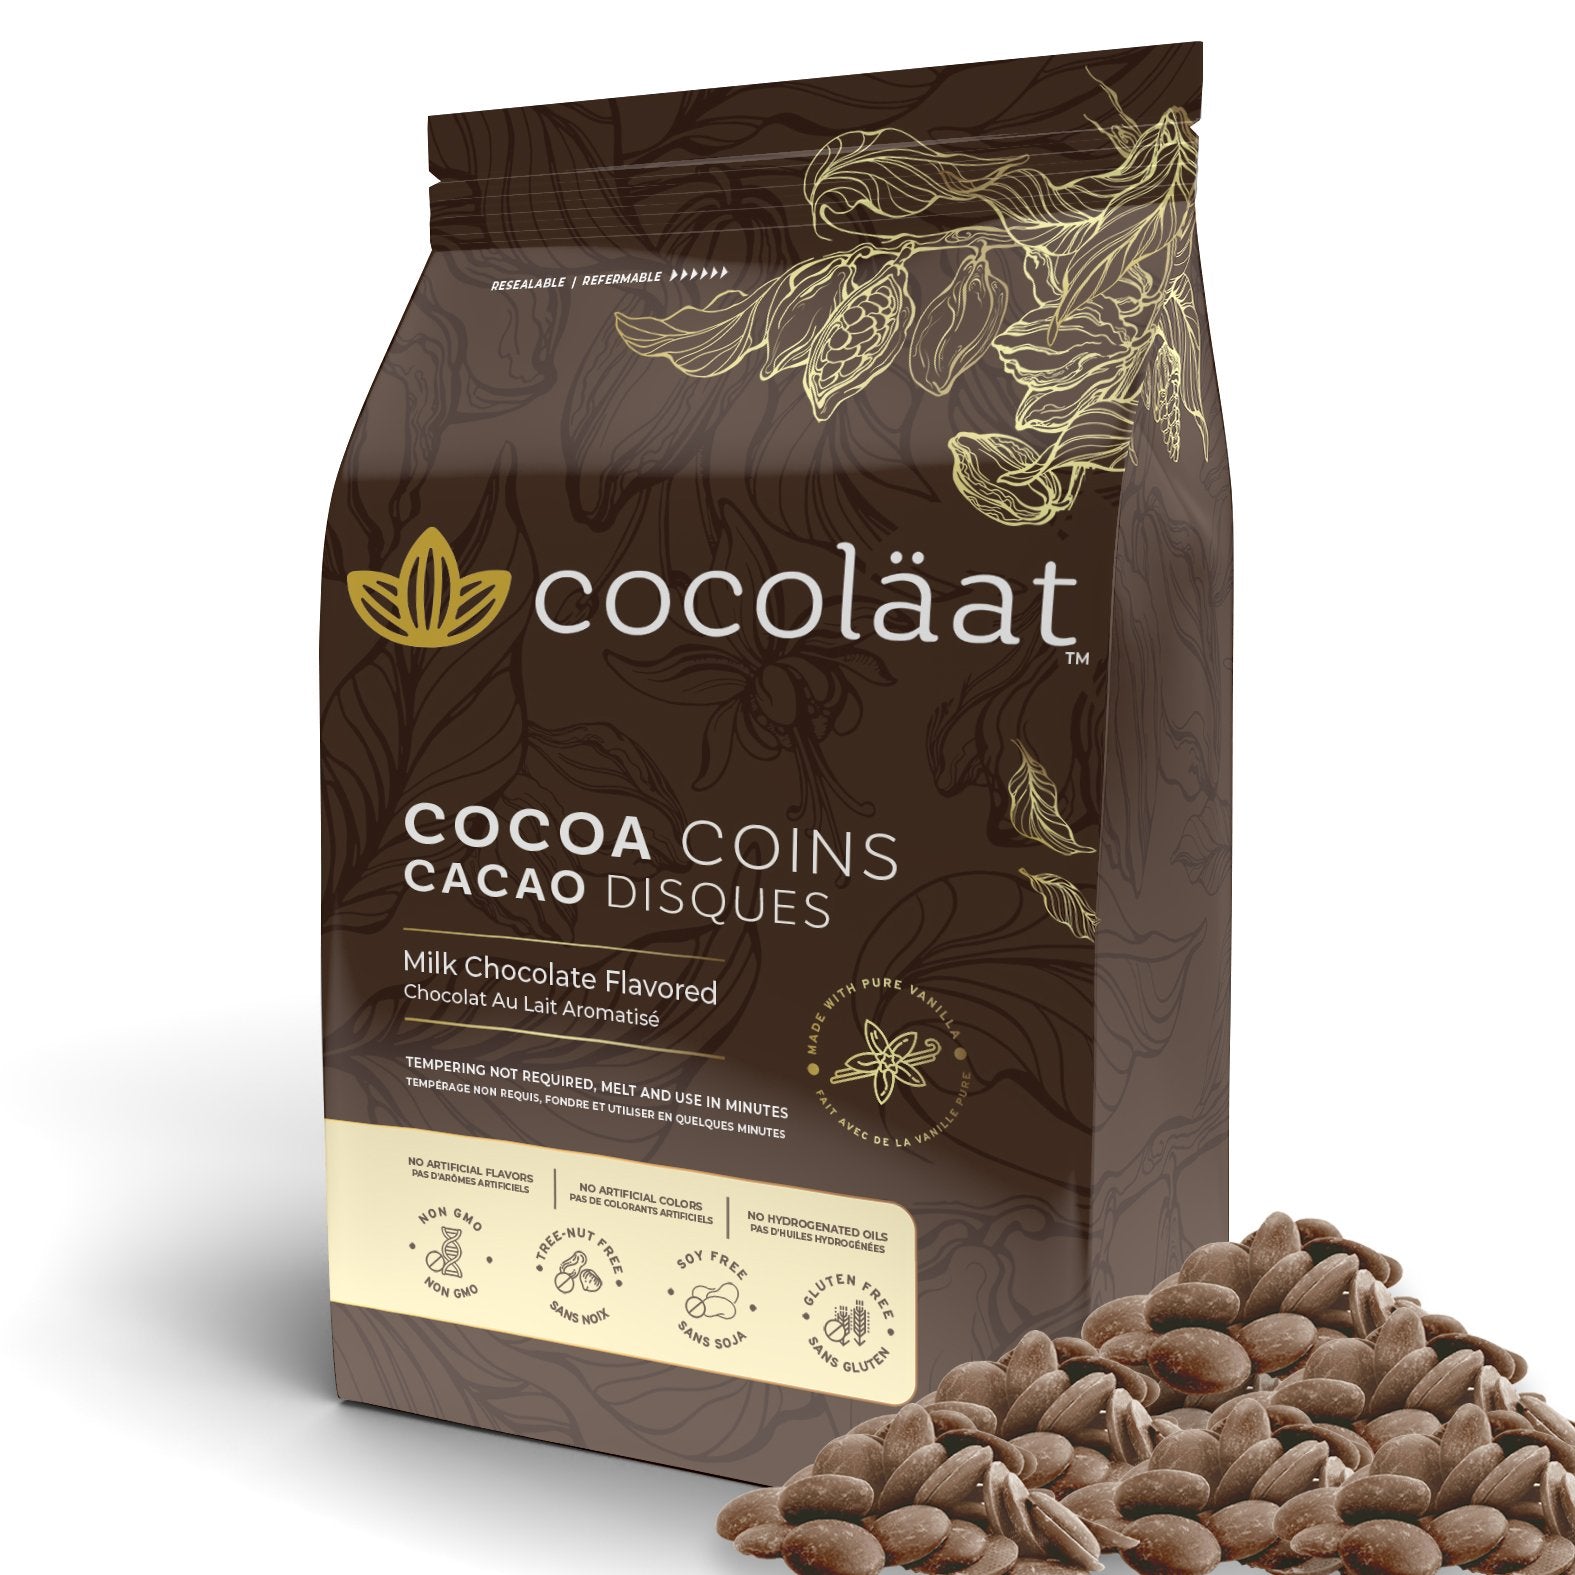 Cocoa Coins - Milk Chocolate Flavored